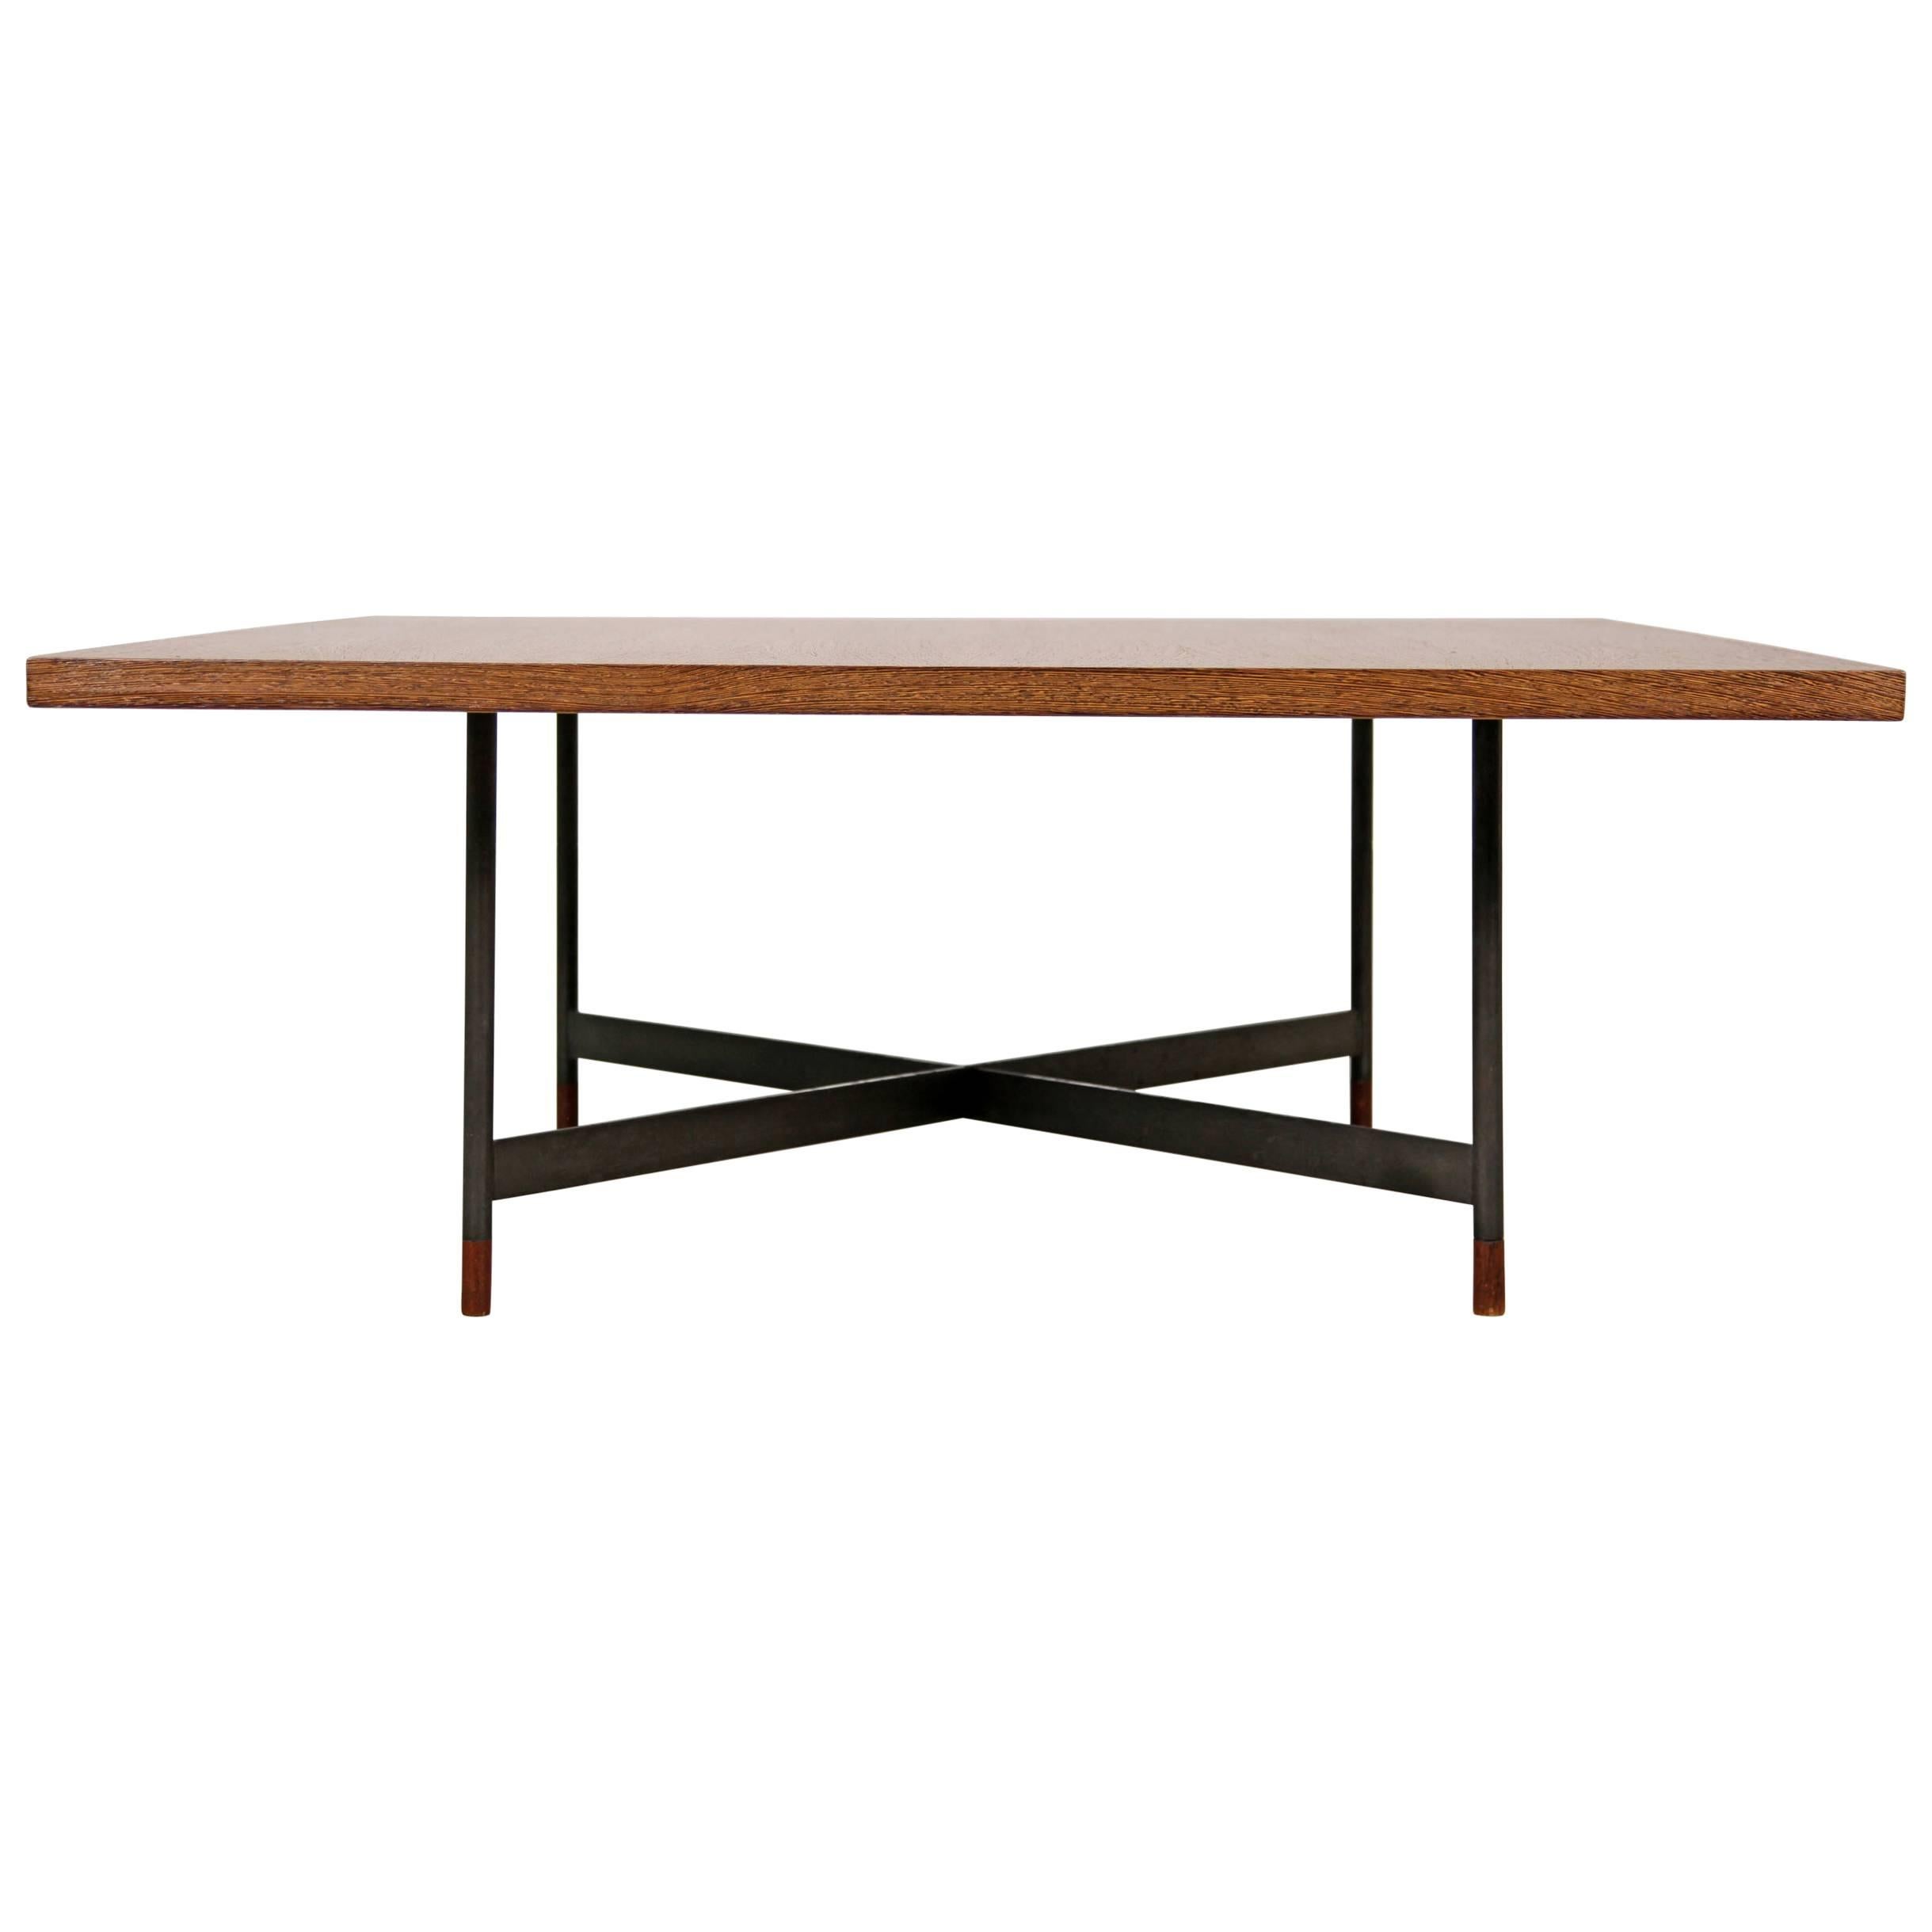 Rare Finn Juhl Coffee Table FJ-57 with Wenge Top For Sale